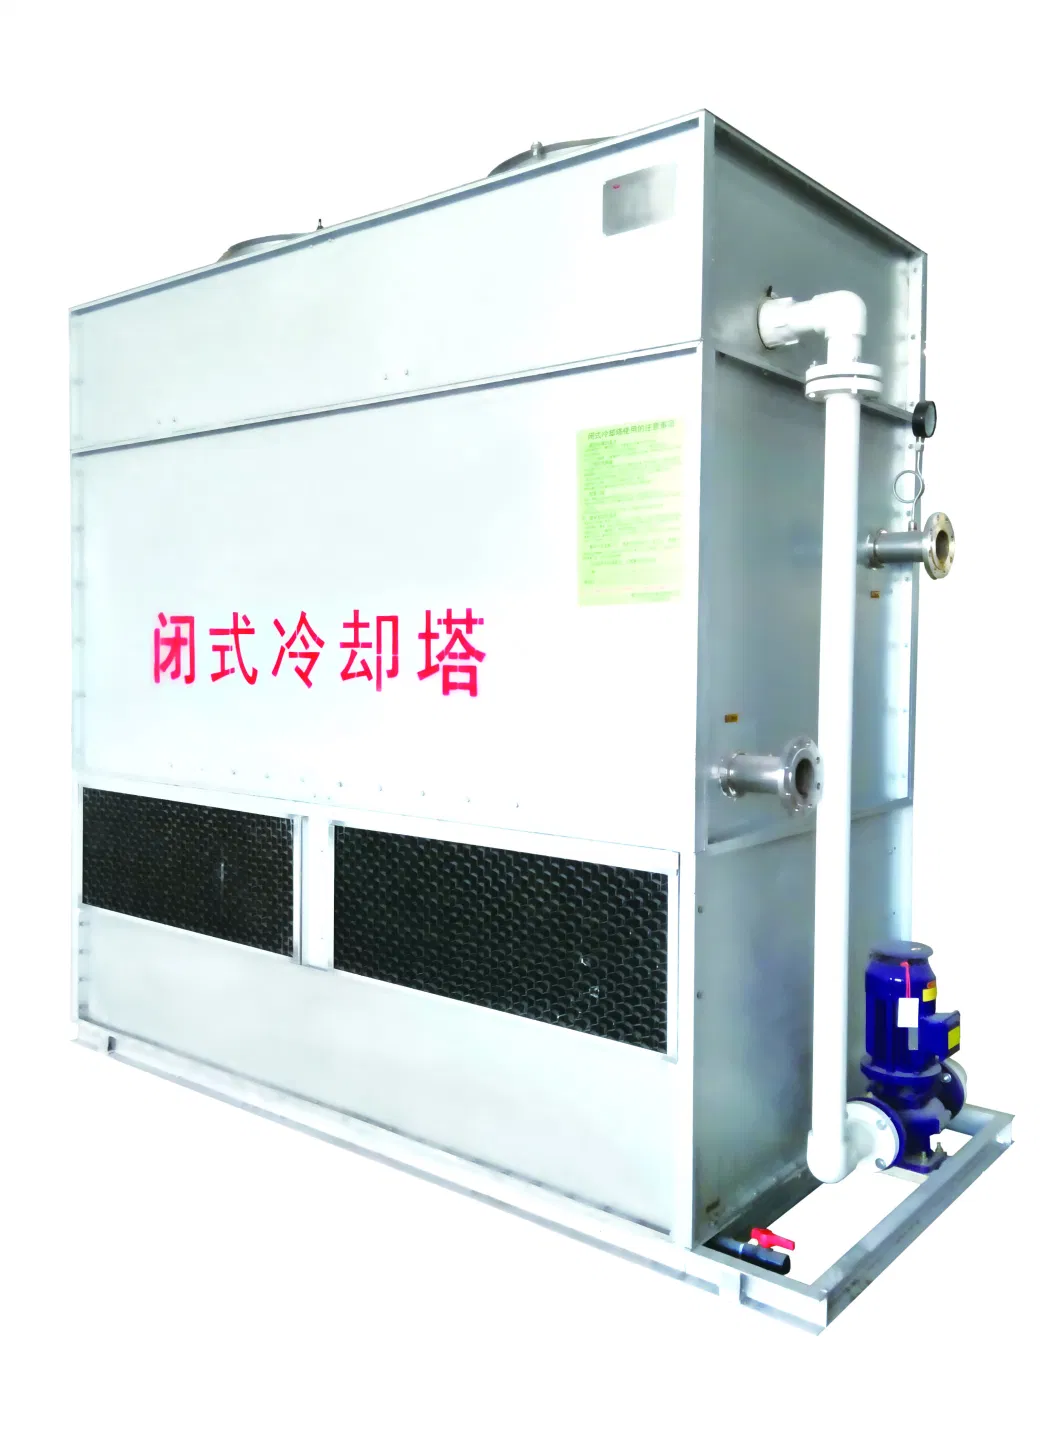 Electric Industrial Induction Melting Furnace with 10 Ton Capacity for Pig Iron Scrap Steel Sand Casting